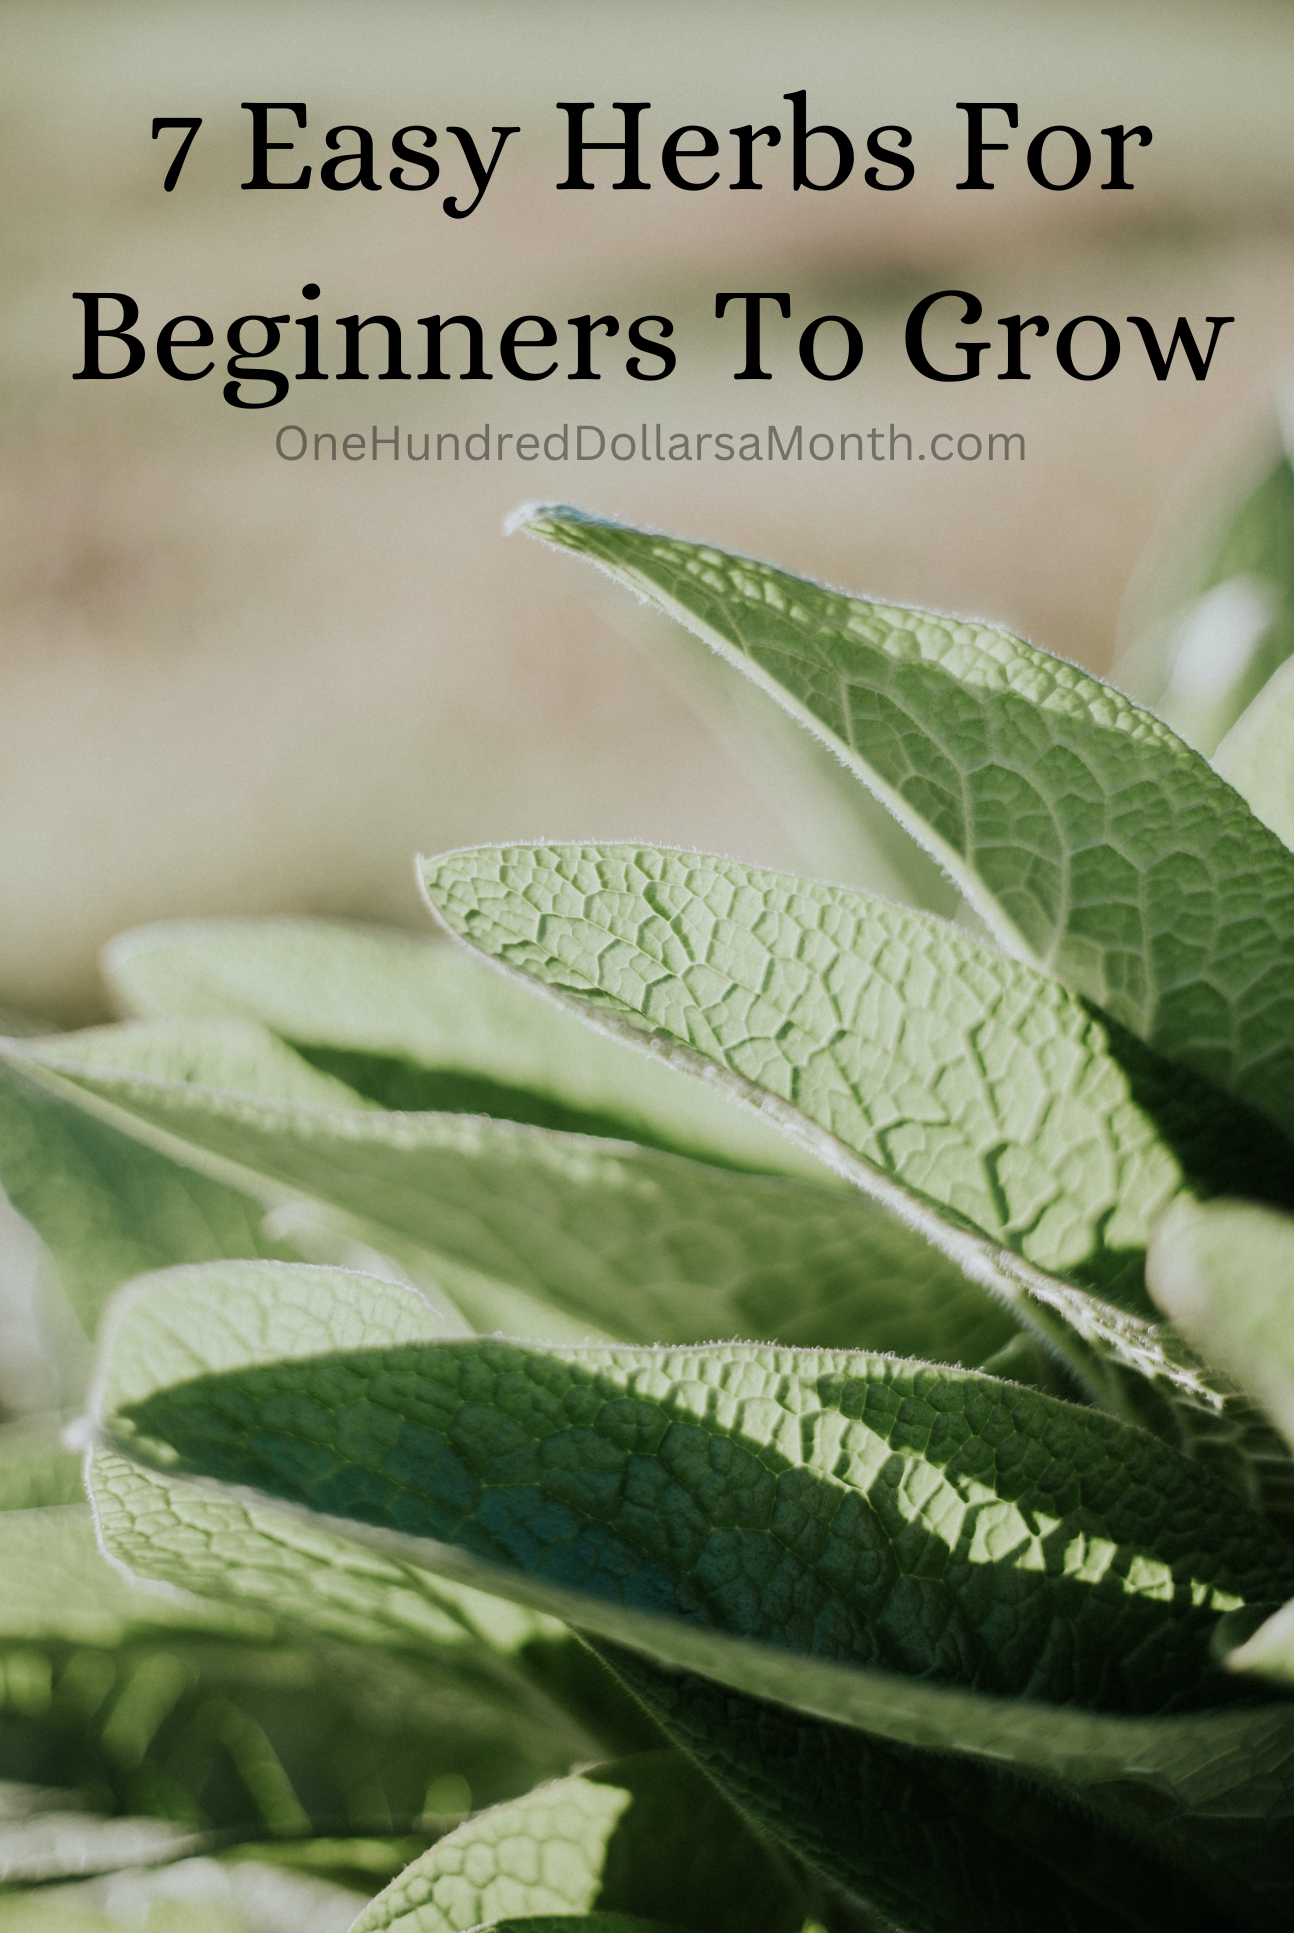 7 Easy Herbs For Beginners To Grow